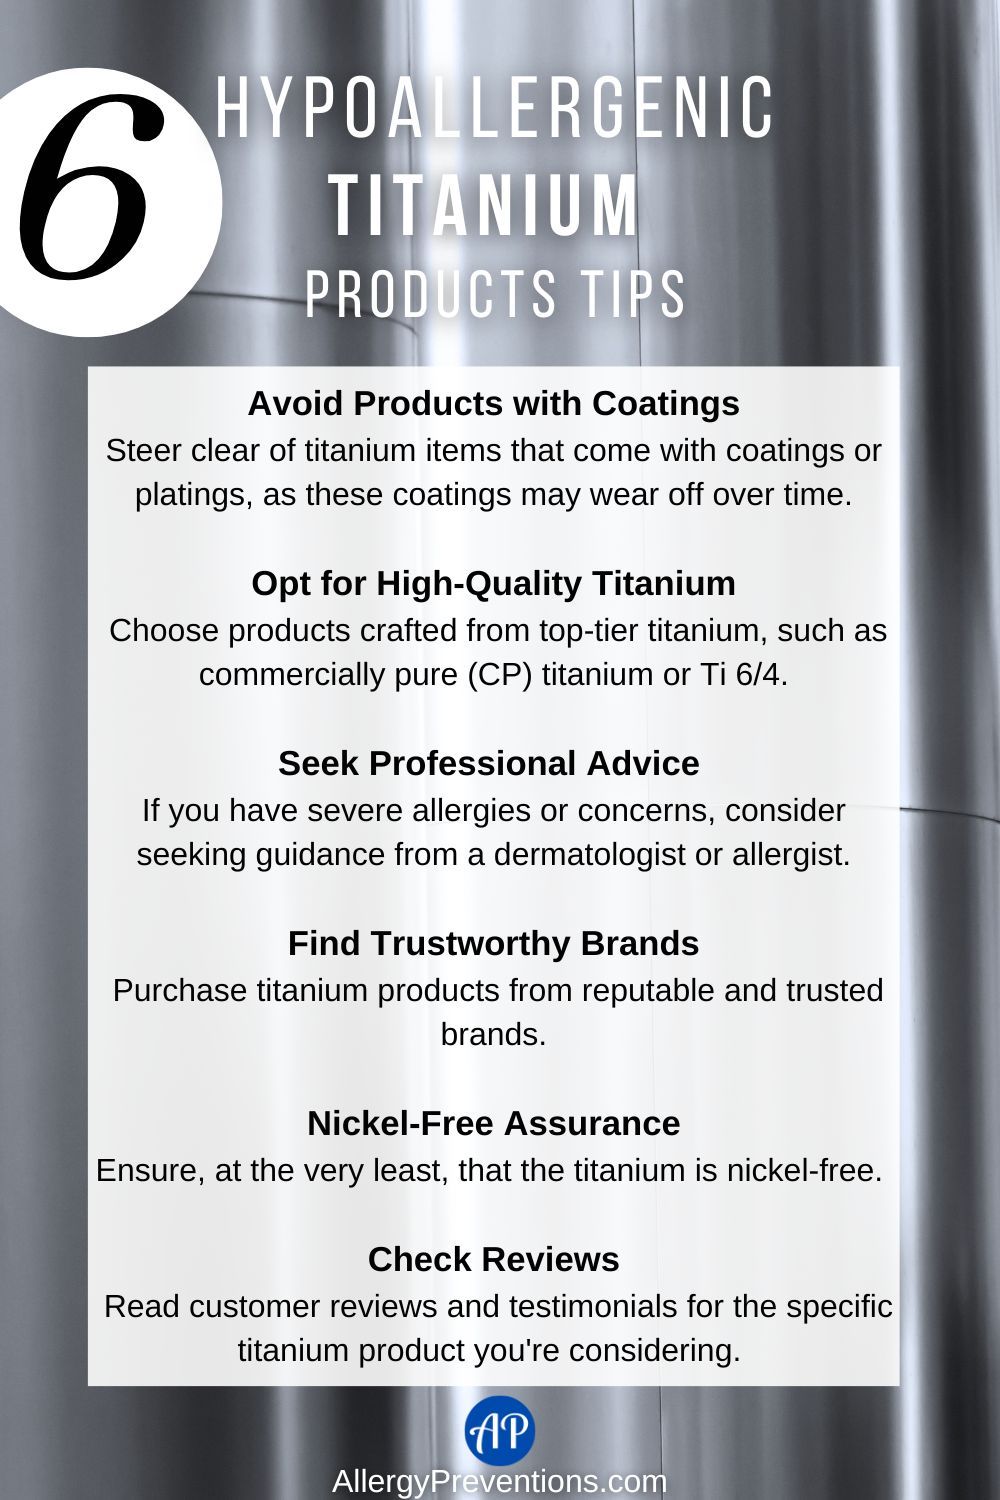 Hypoallergenic titanium products tips infographic: Avoid Products with Coatings Steer clear of titanium items that come with coatings or platings, as these coatings may wear off over time. Opt for High-Quality Titanium Choose products crafted from top-tier titanium, such as commercially pure (CP) titanium or Ti 6/4. Seek Professional Advice If you have severe allergies or concerns, consider seeking guidance from a dermatologist or allergist. Find Trustworthy Brands Purchase titanium products from reputable and trusted brands. Nickel-Free Assurance Ensure, at the very least, that the titanium is nickel-free. Check Reviews Read customer reviews and testimonials for the specific titanium product you're considering.